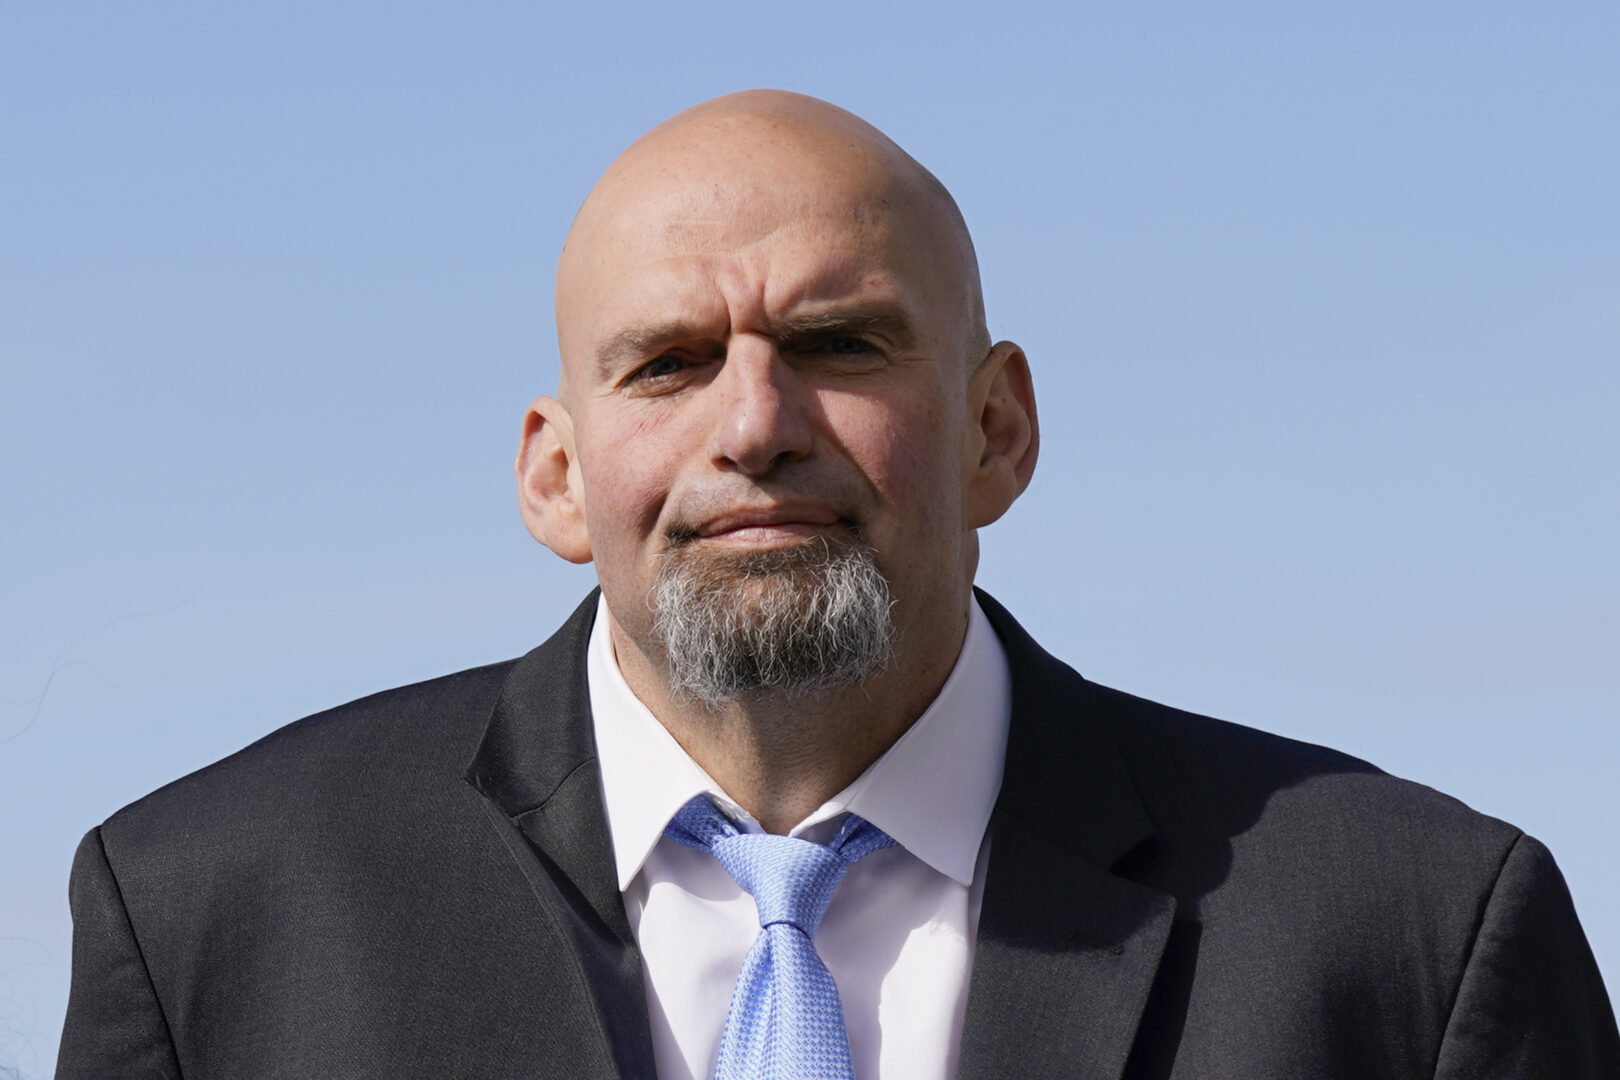 FILE - Pennsylvania Lt. Gov. John Fetterman, a Democratic candidate for U.S. Senate, stands on the tarmac after greeting President Joe Biden, on Oct. 20, 2022, at the 171st Air Refueling Wing at Pittsburgh International Airport in Coraopolis, Pa. (AP Photo/Patrick Semansky, File)